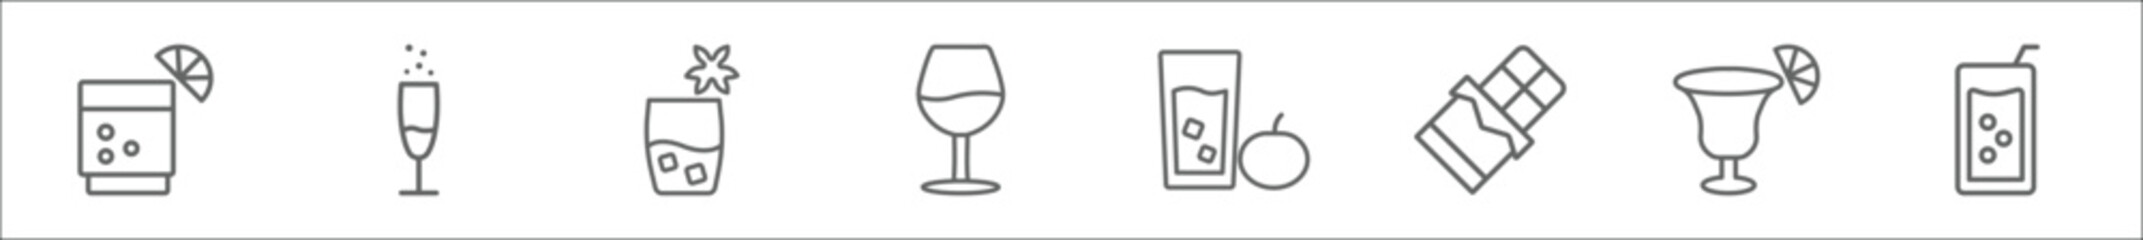 outline set of drinks line icons. linear vector icons such as lime rickey drink, champagne, caipiroska, wine, tomato juice, chote, last word drink, soft drink